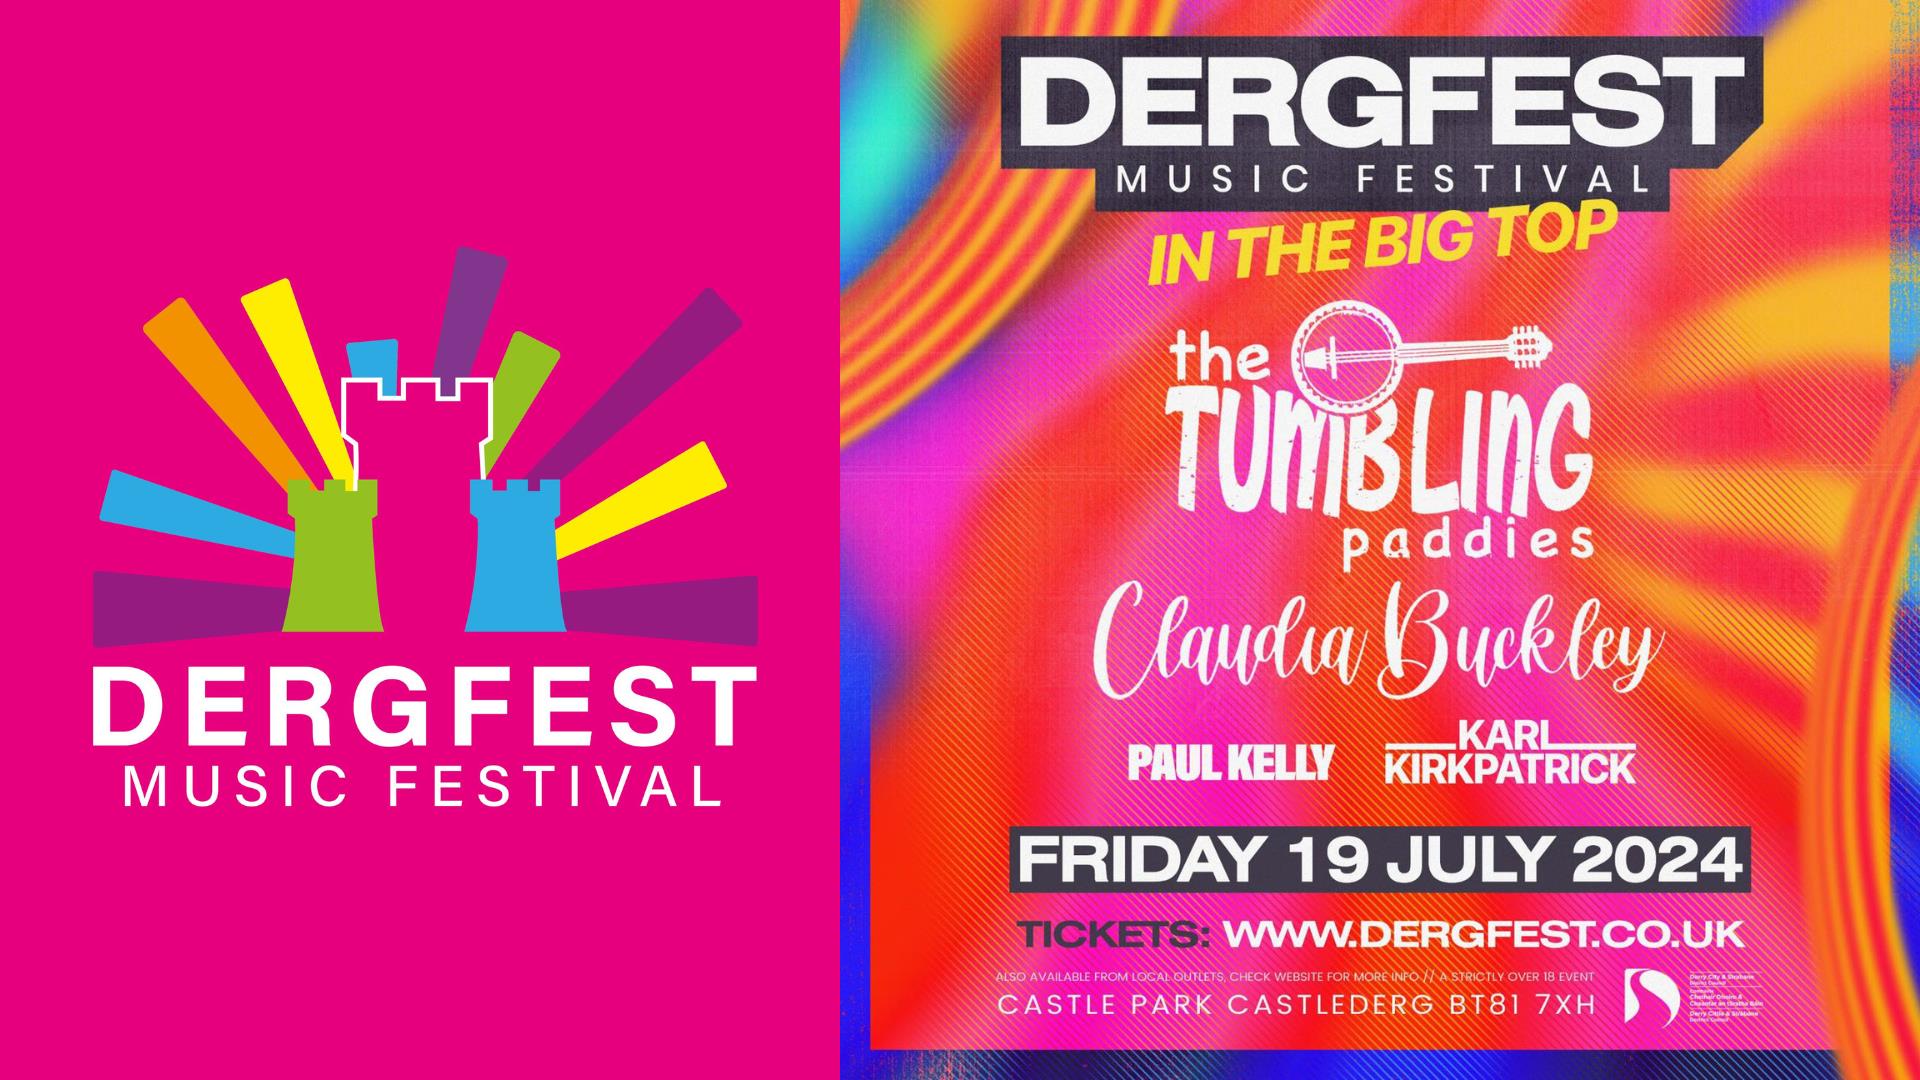 The Dergfest logo and the current act lineup on a colourful background.